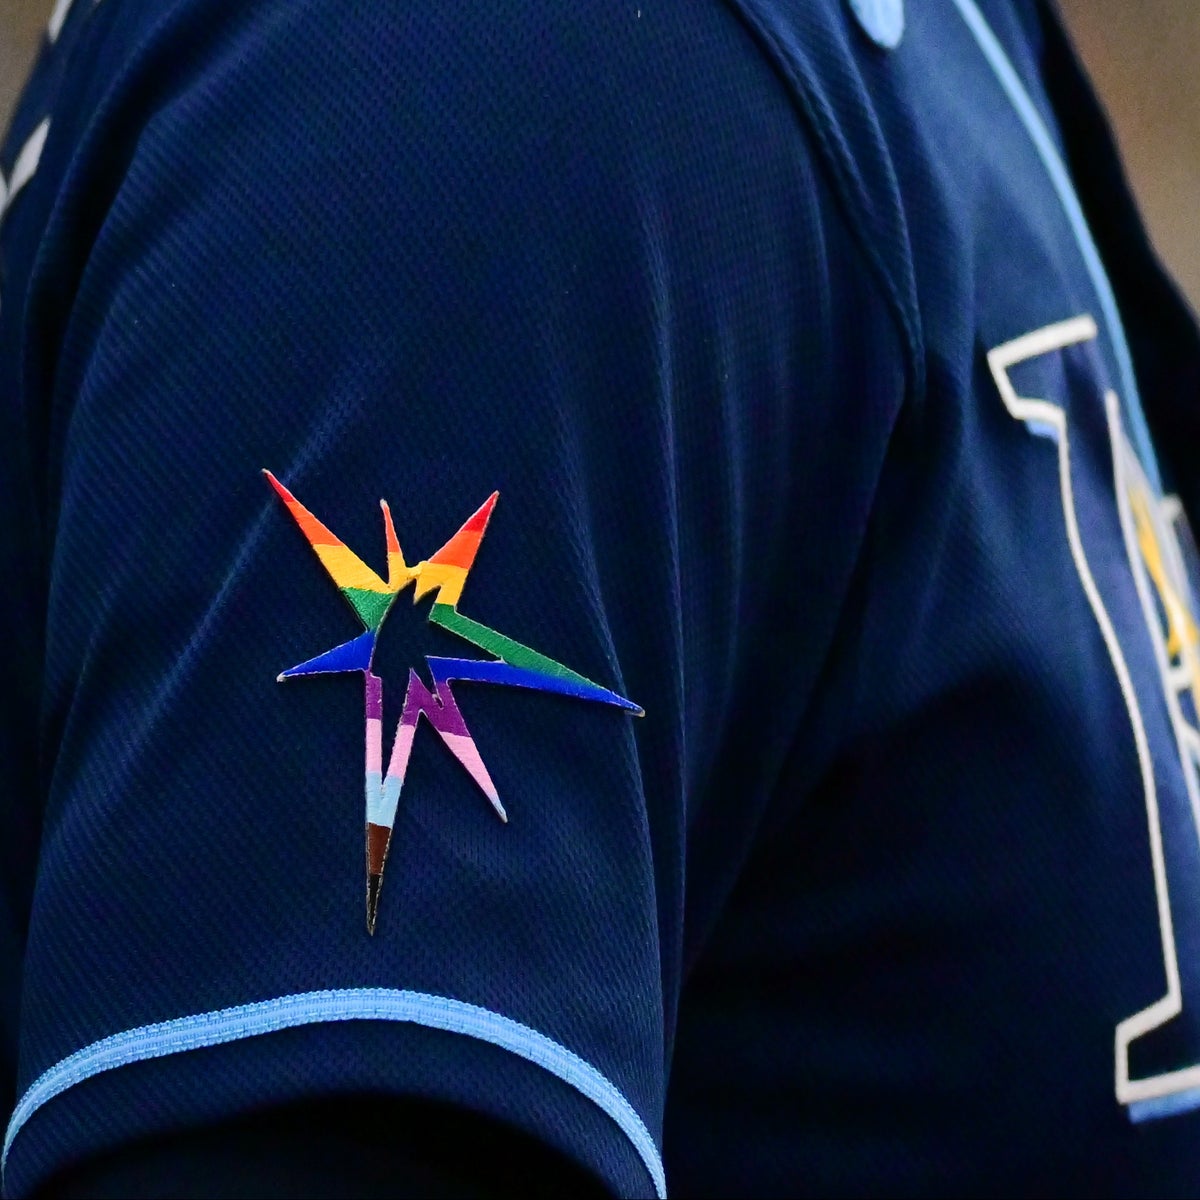 At least 5 Tampa Bay Rays players refuse to wear pro-LGBTQ rainbow